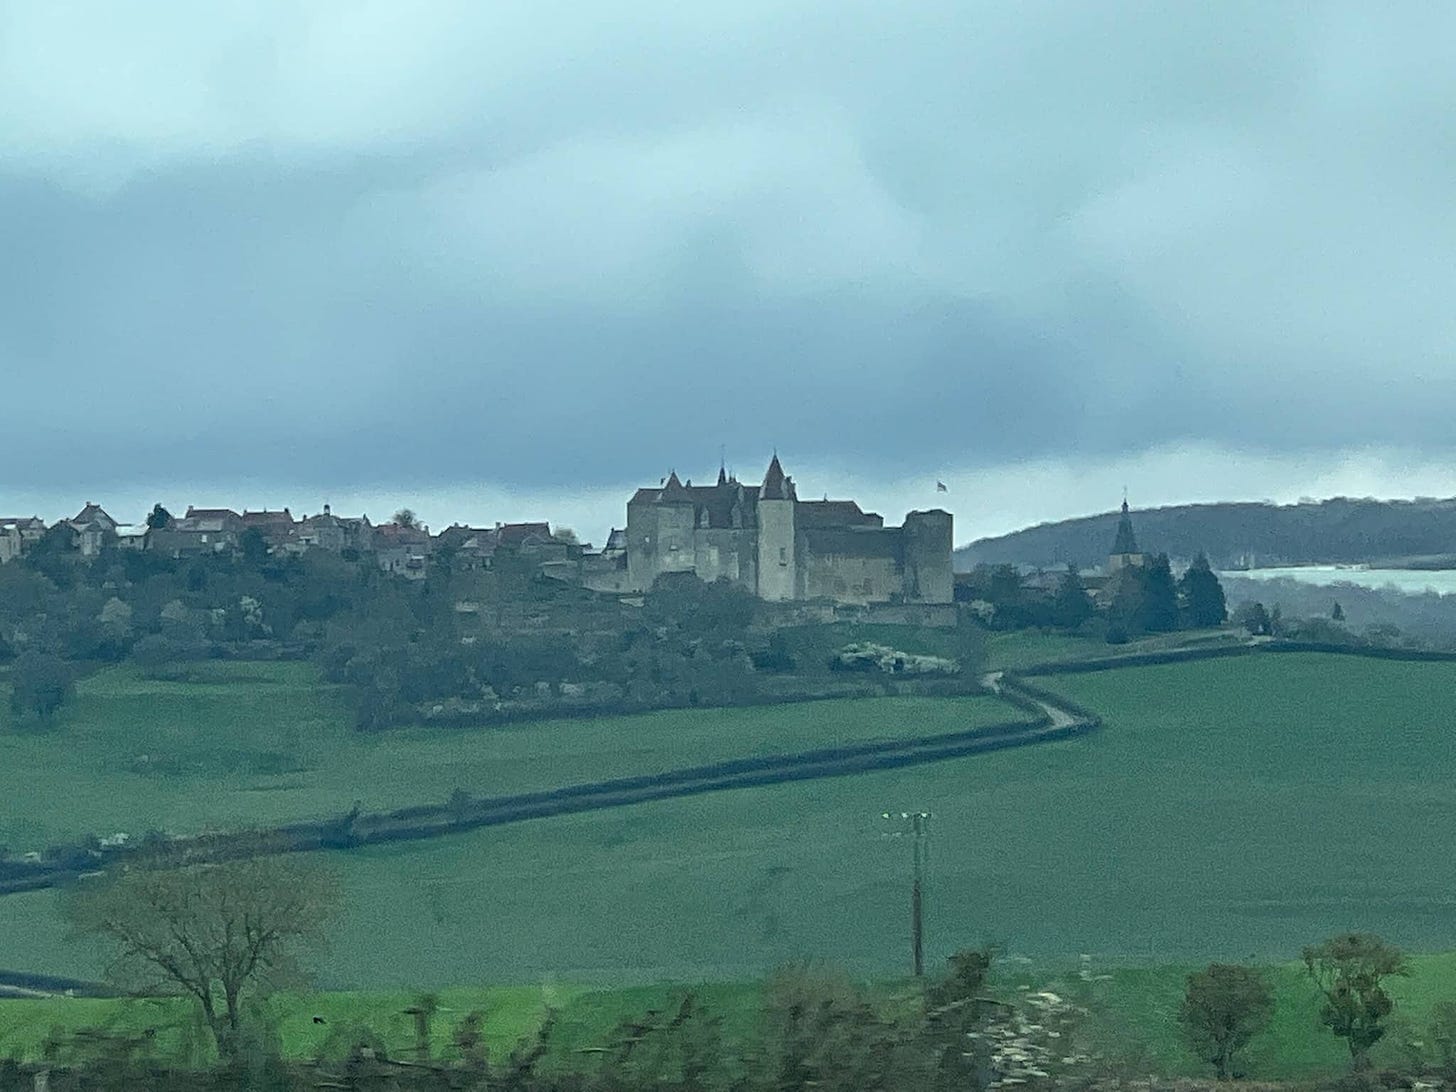 A quick snap of a castle we saw in the distance.